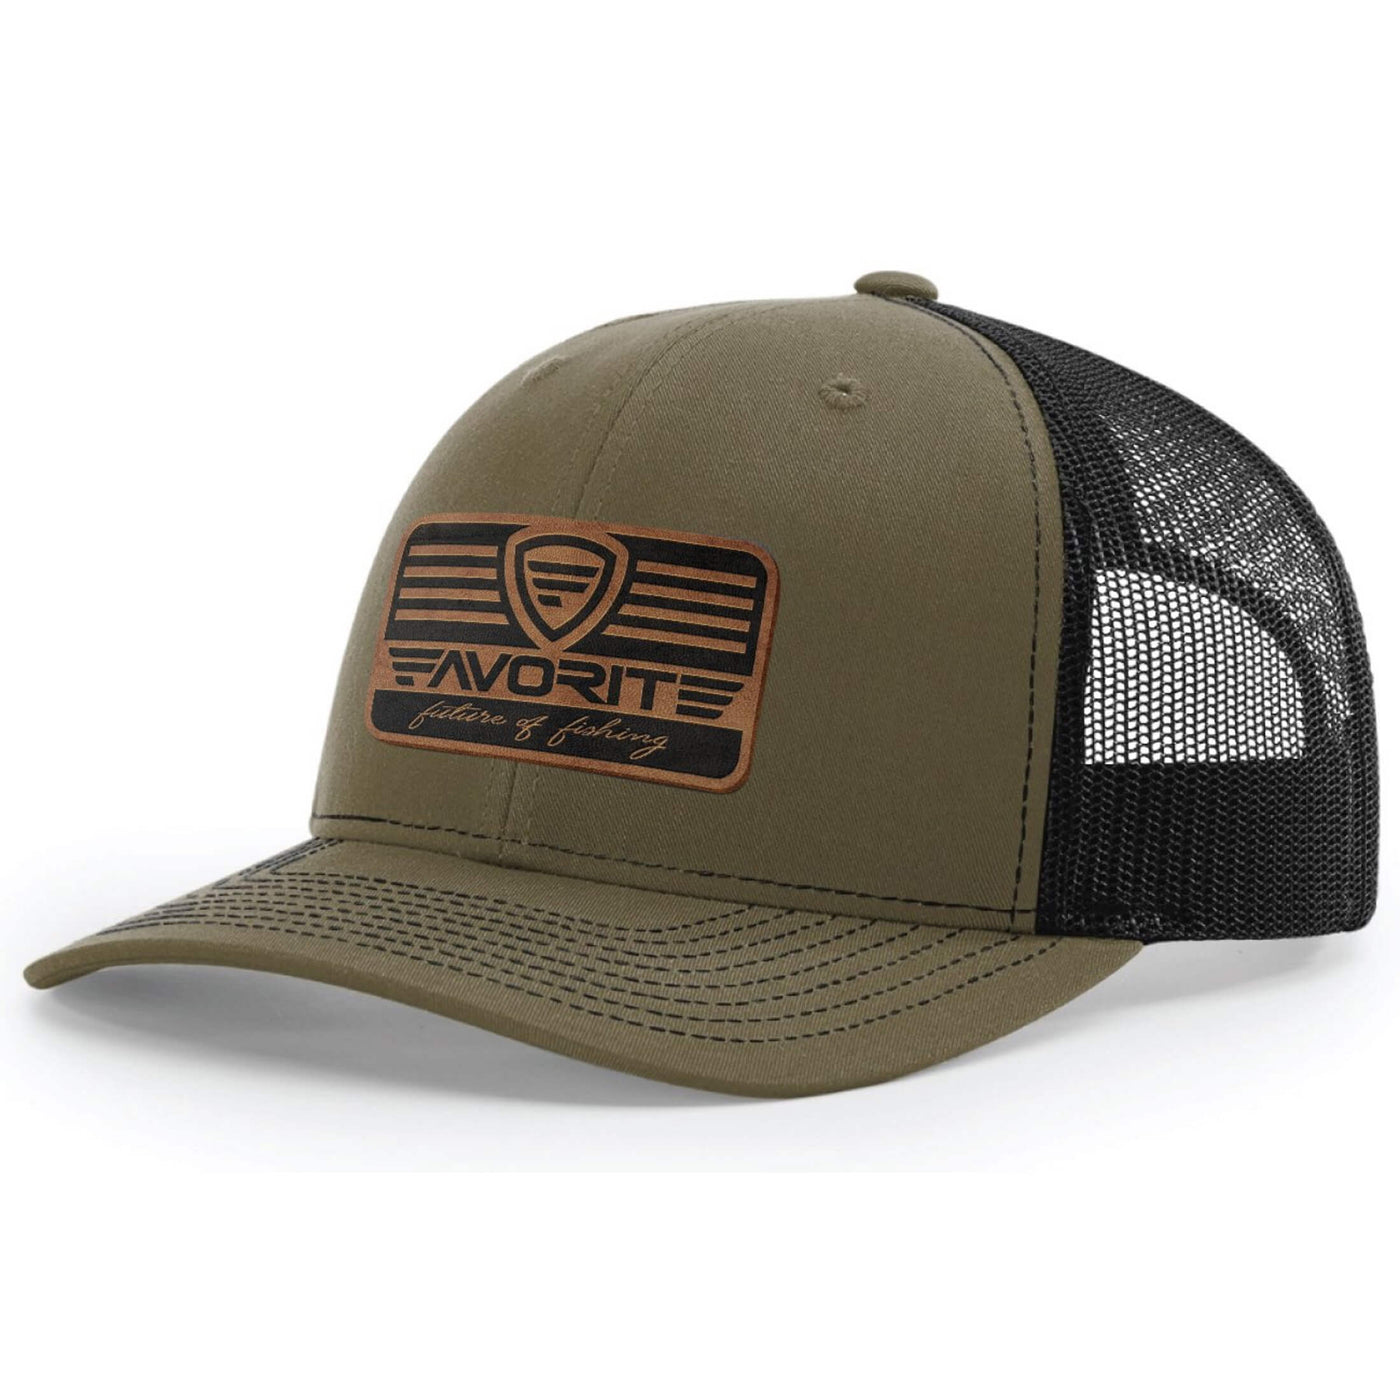 Franchise Leather Patch Hat Favorite Fishing